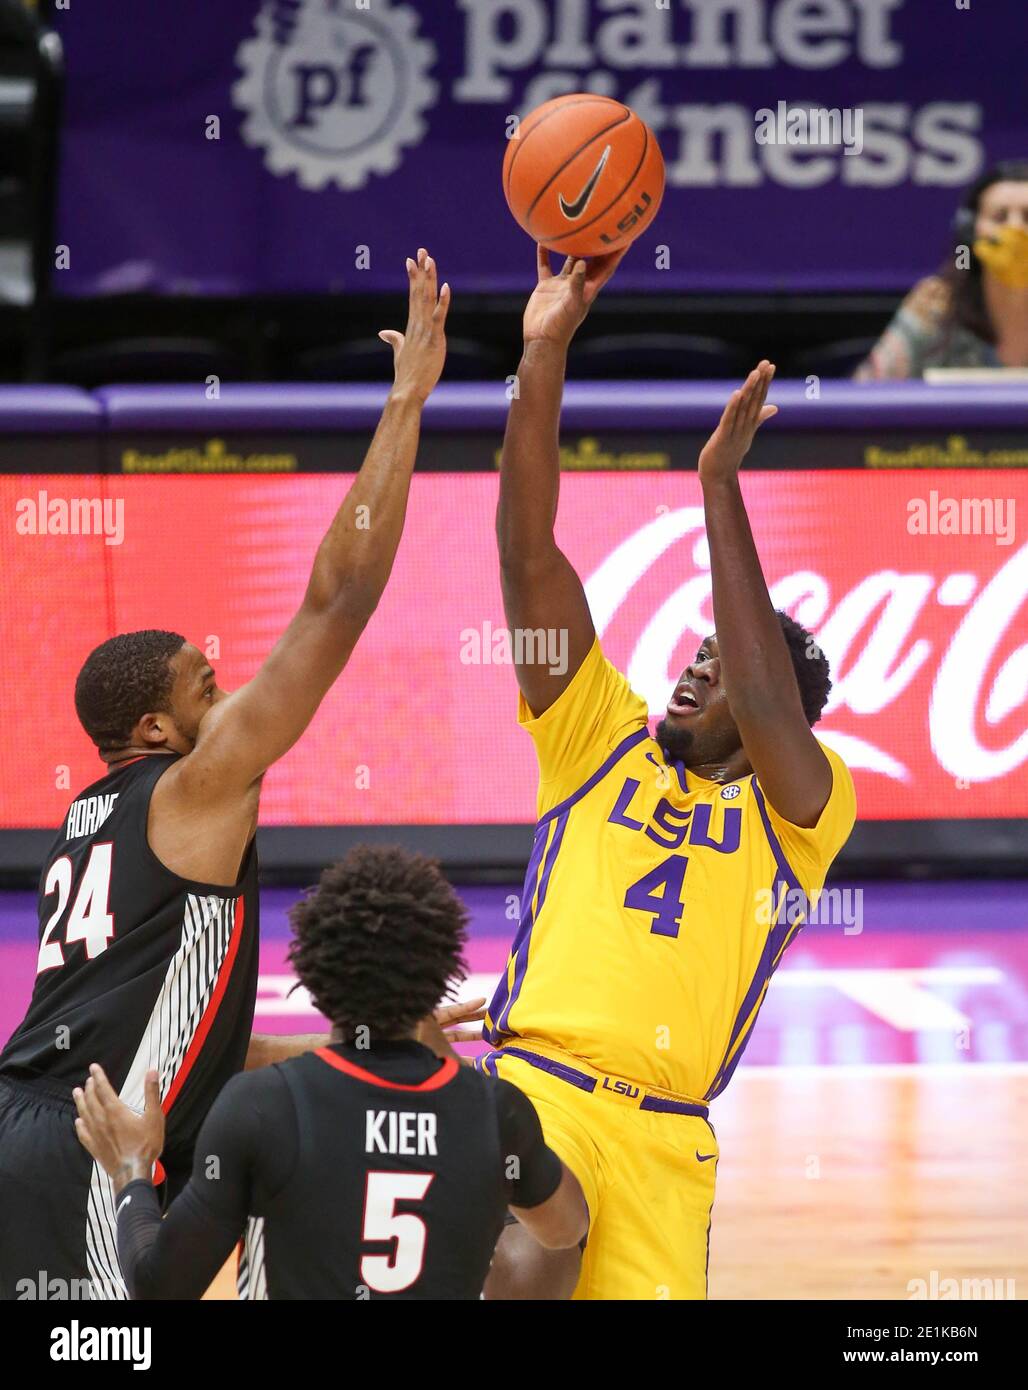 January 6, 2021: LSU Forward Darius Days (4) puts up a shot over Georgia's P.J. Horne (24) and Justin Kier (5) during NCAA Basketball action between the Georgia Bulldogs and the LSU Tigers at the Pete Maravich Assembly Center in Baton Rouge, LA. Jonathan Mailhes/CSM Stock Photo